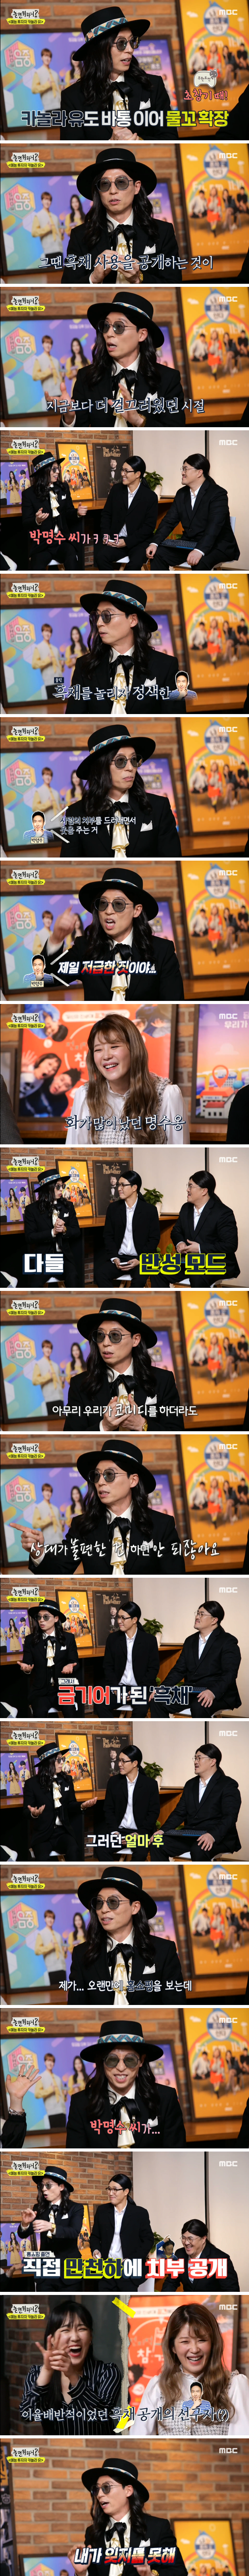 The incident in which Park Myung-soo was truly infatuated with the members of Infinite Challenge.